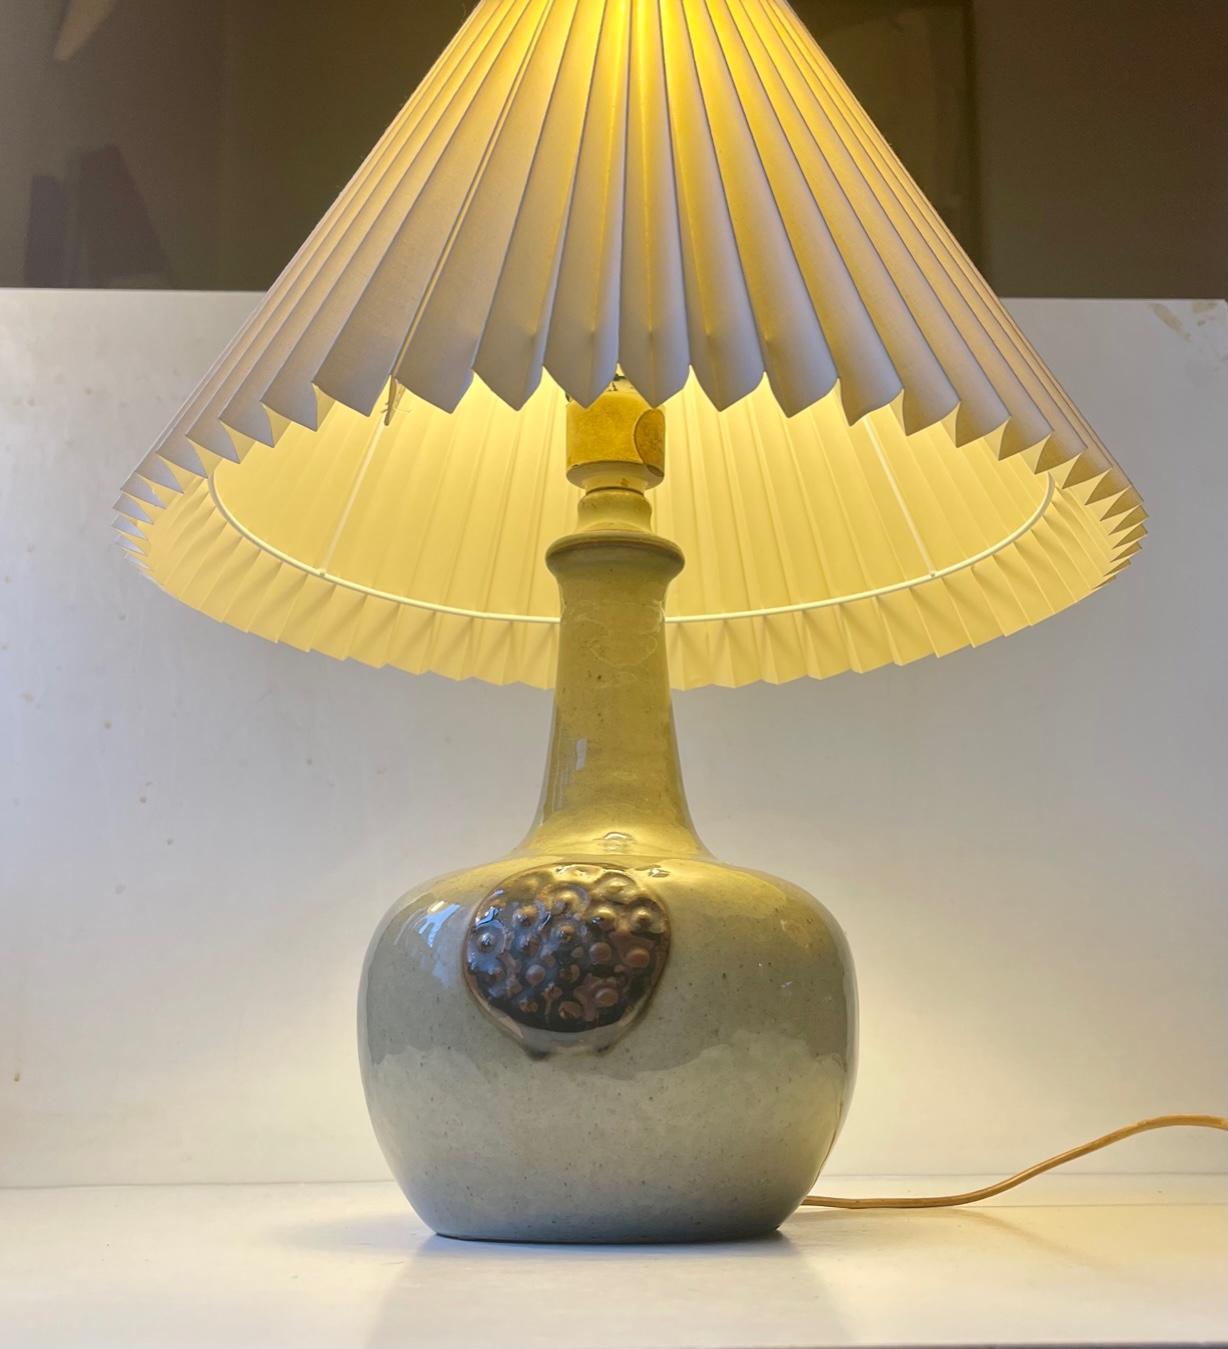 Gourd shaped stoneware Table light designed and manufcatured by Knabstrup in Denmark during the 1960s-70s. Hand decorated abstract center motif with distinct brutalist styling upon a sand colored main glaze. It comes with a white fluted acrylic